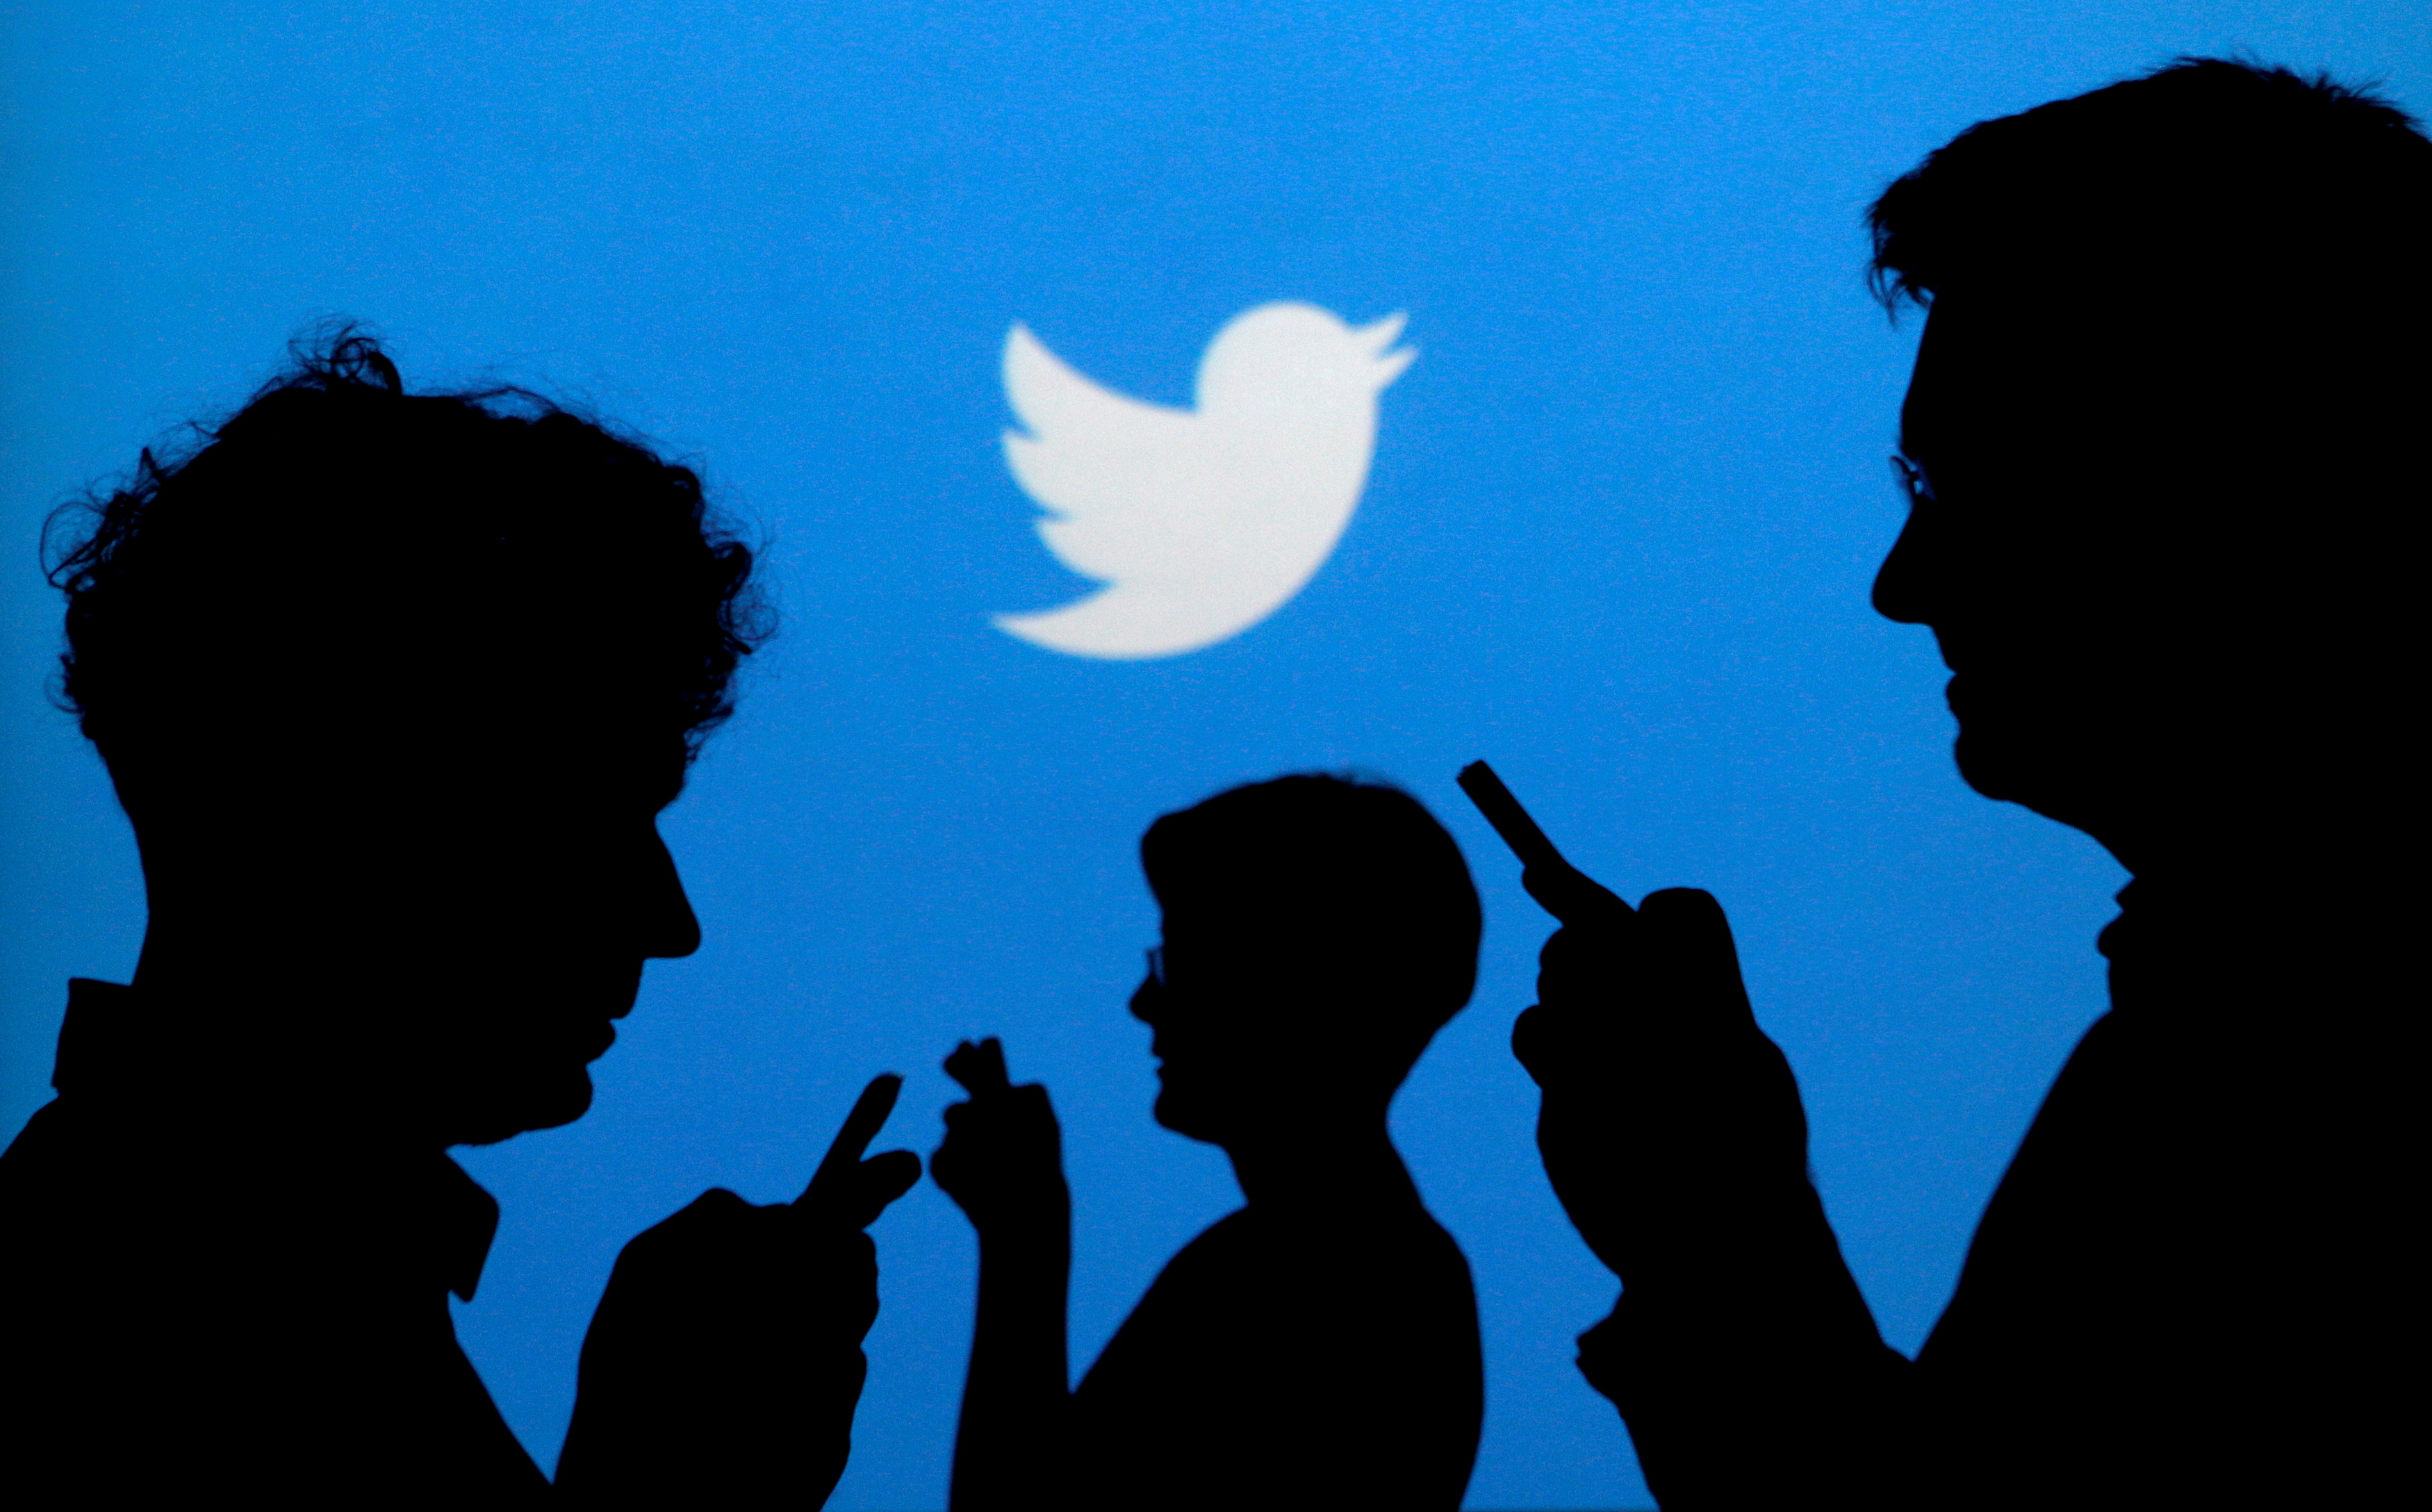 Twitter bans sharing photos, videos of other people without consent